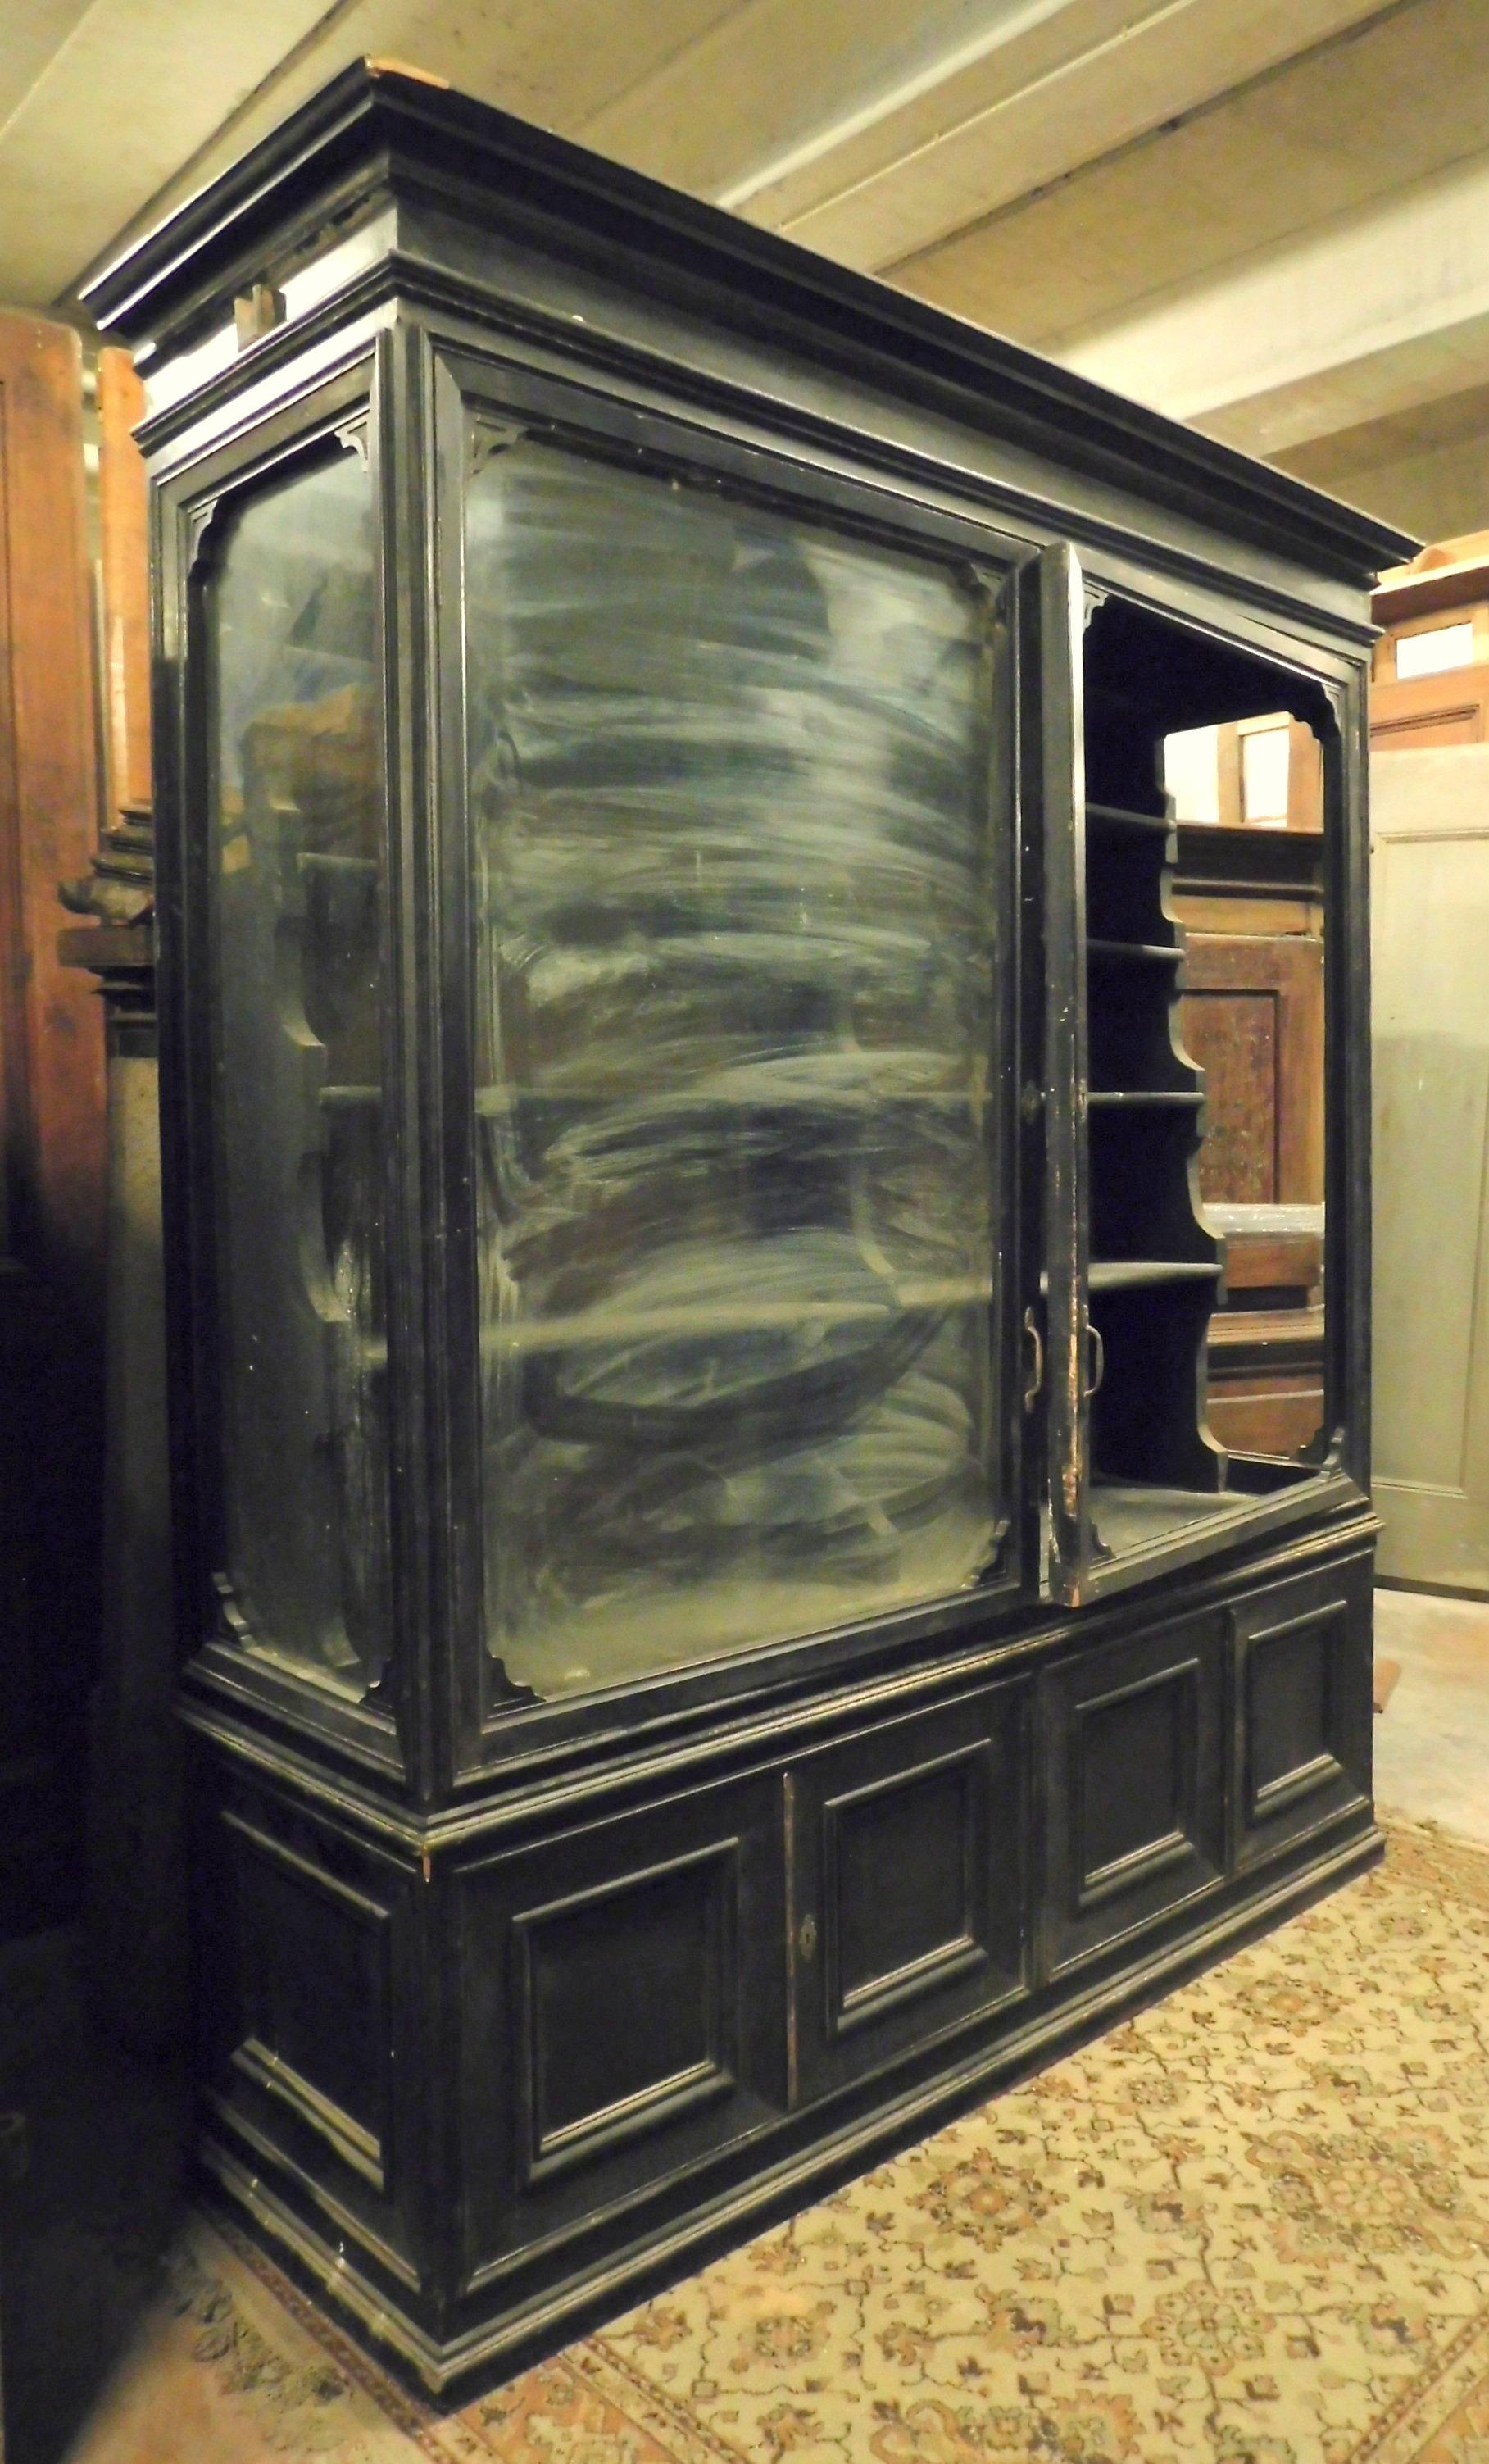 Hand-Carved Old Flat Display Cabinet, Lacquered & Glass, to Be Restored, 19th Century, Italy